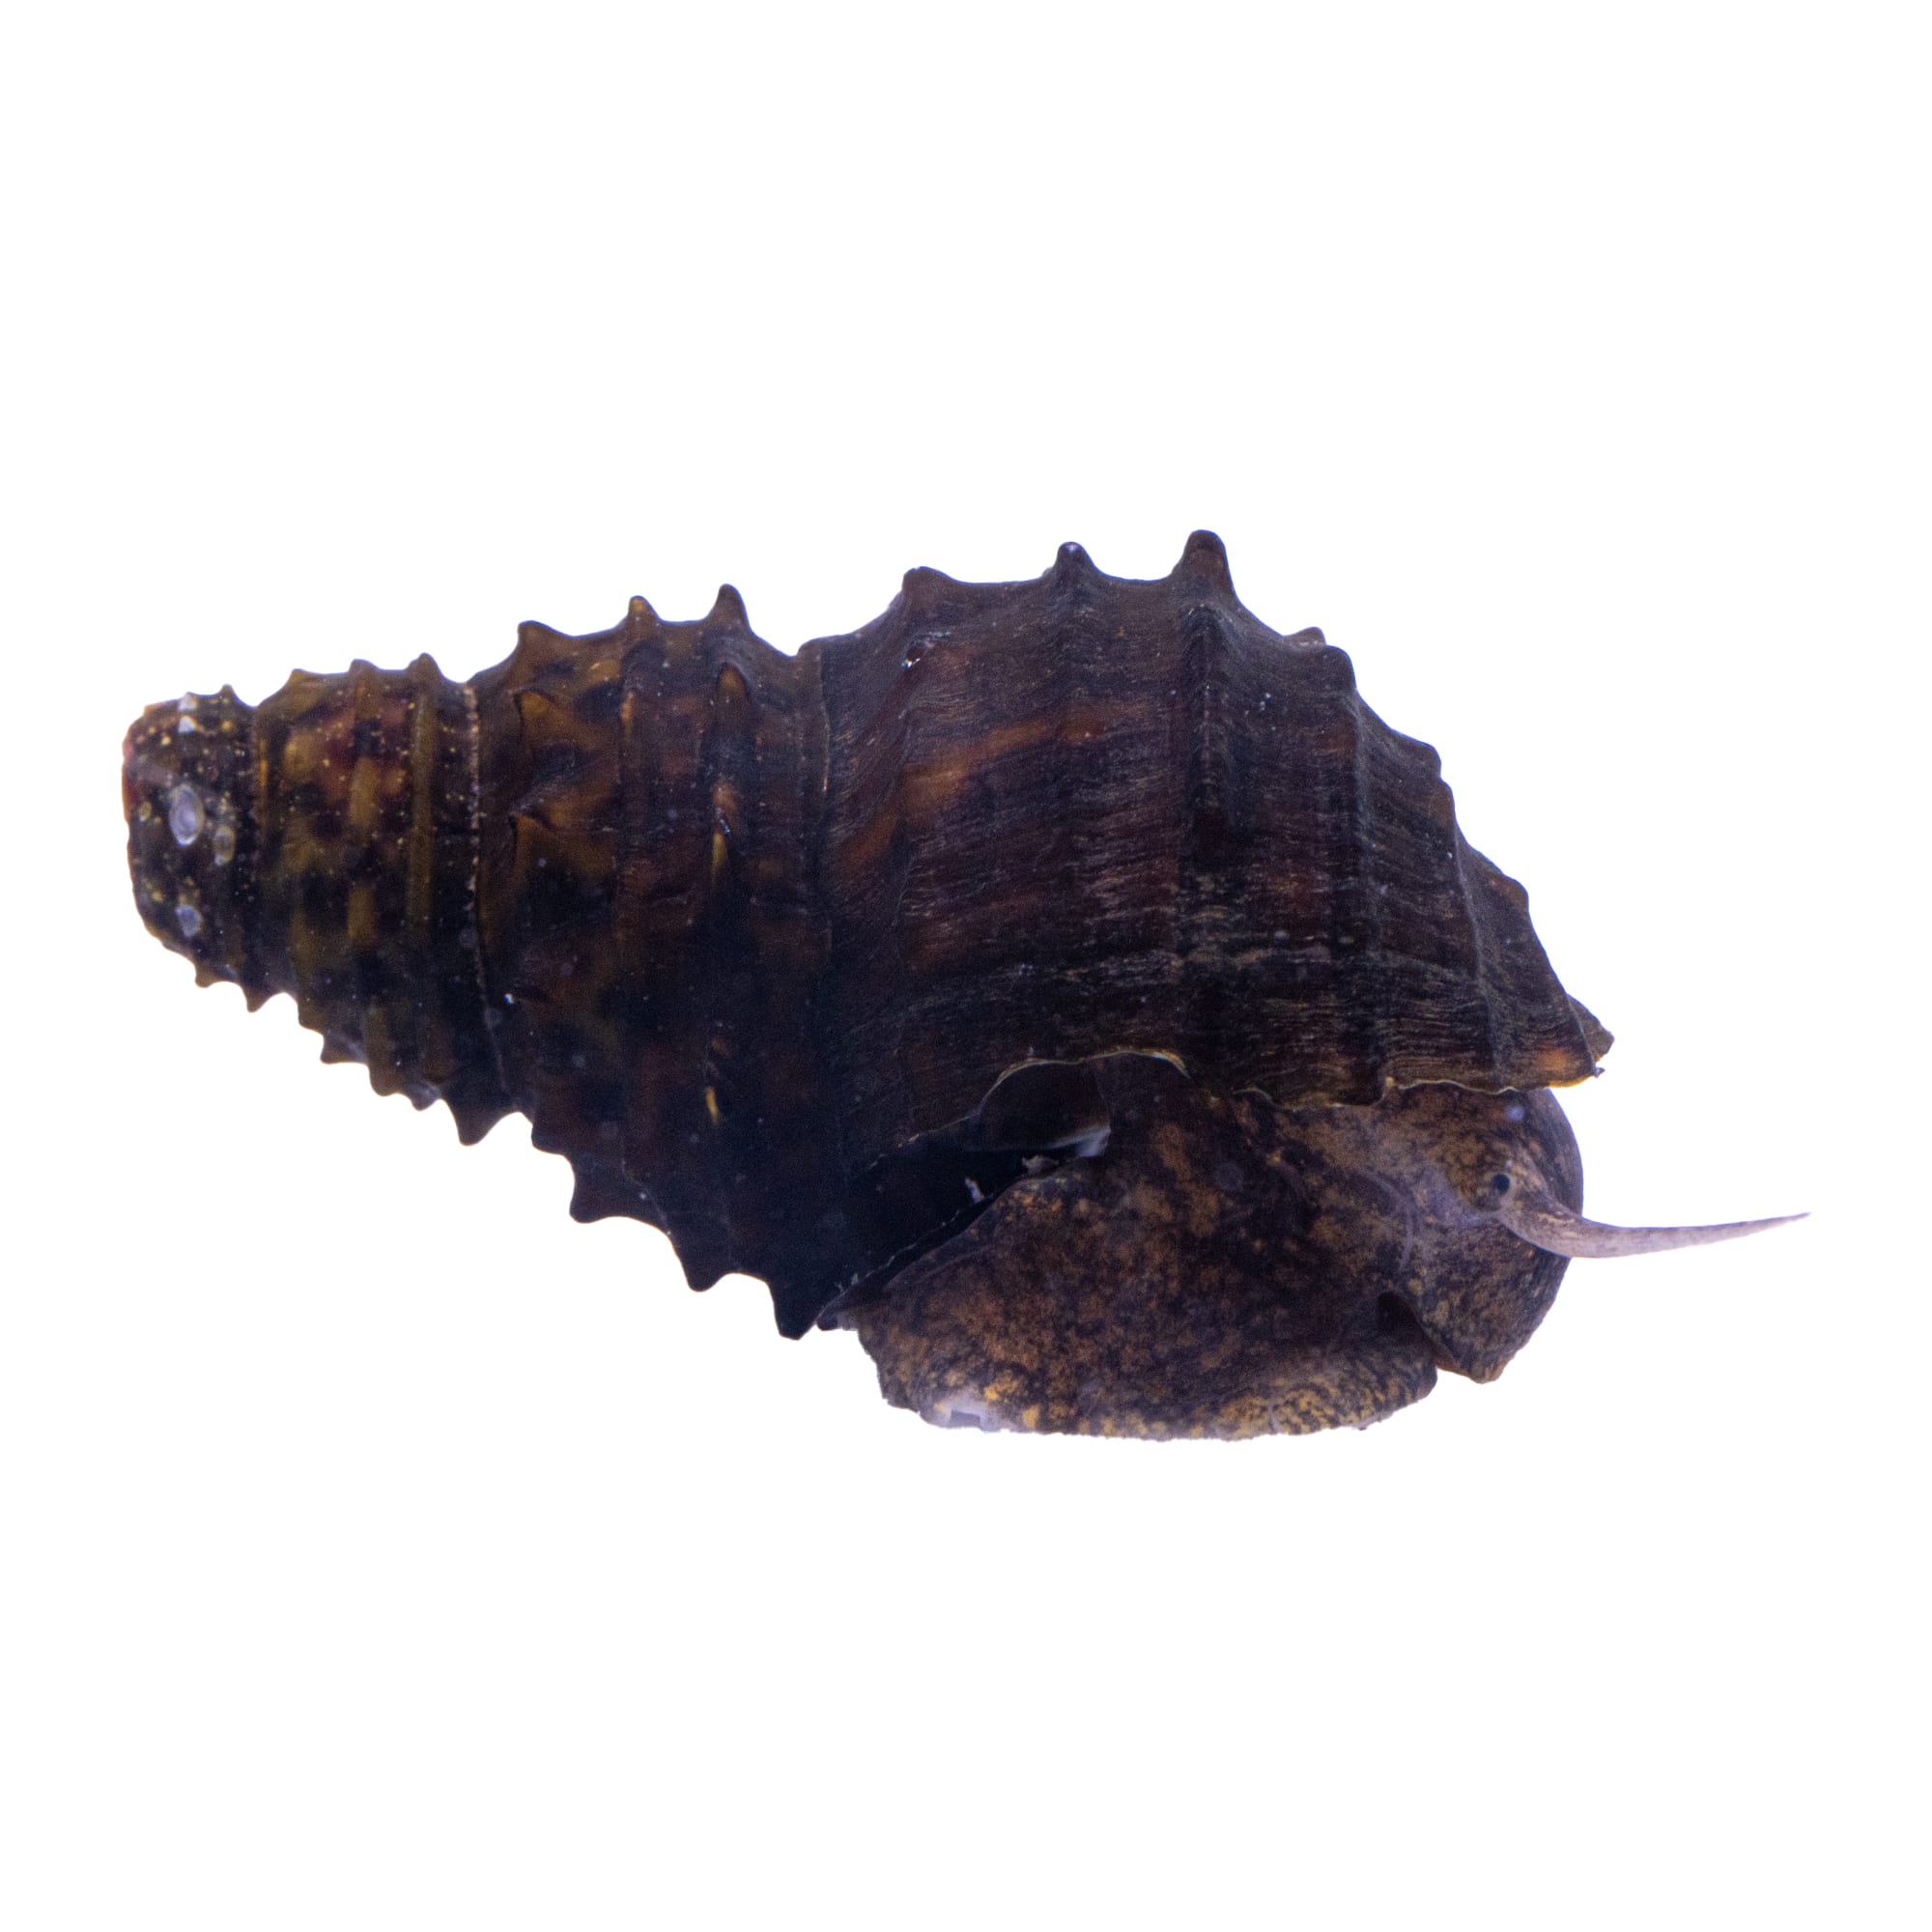 Red Collar Snail (Norrisia norrisi)